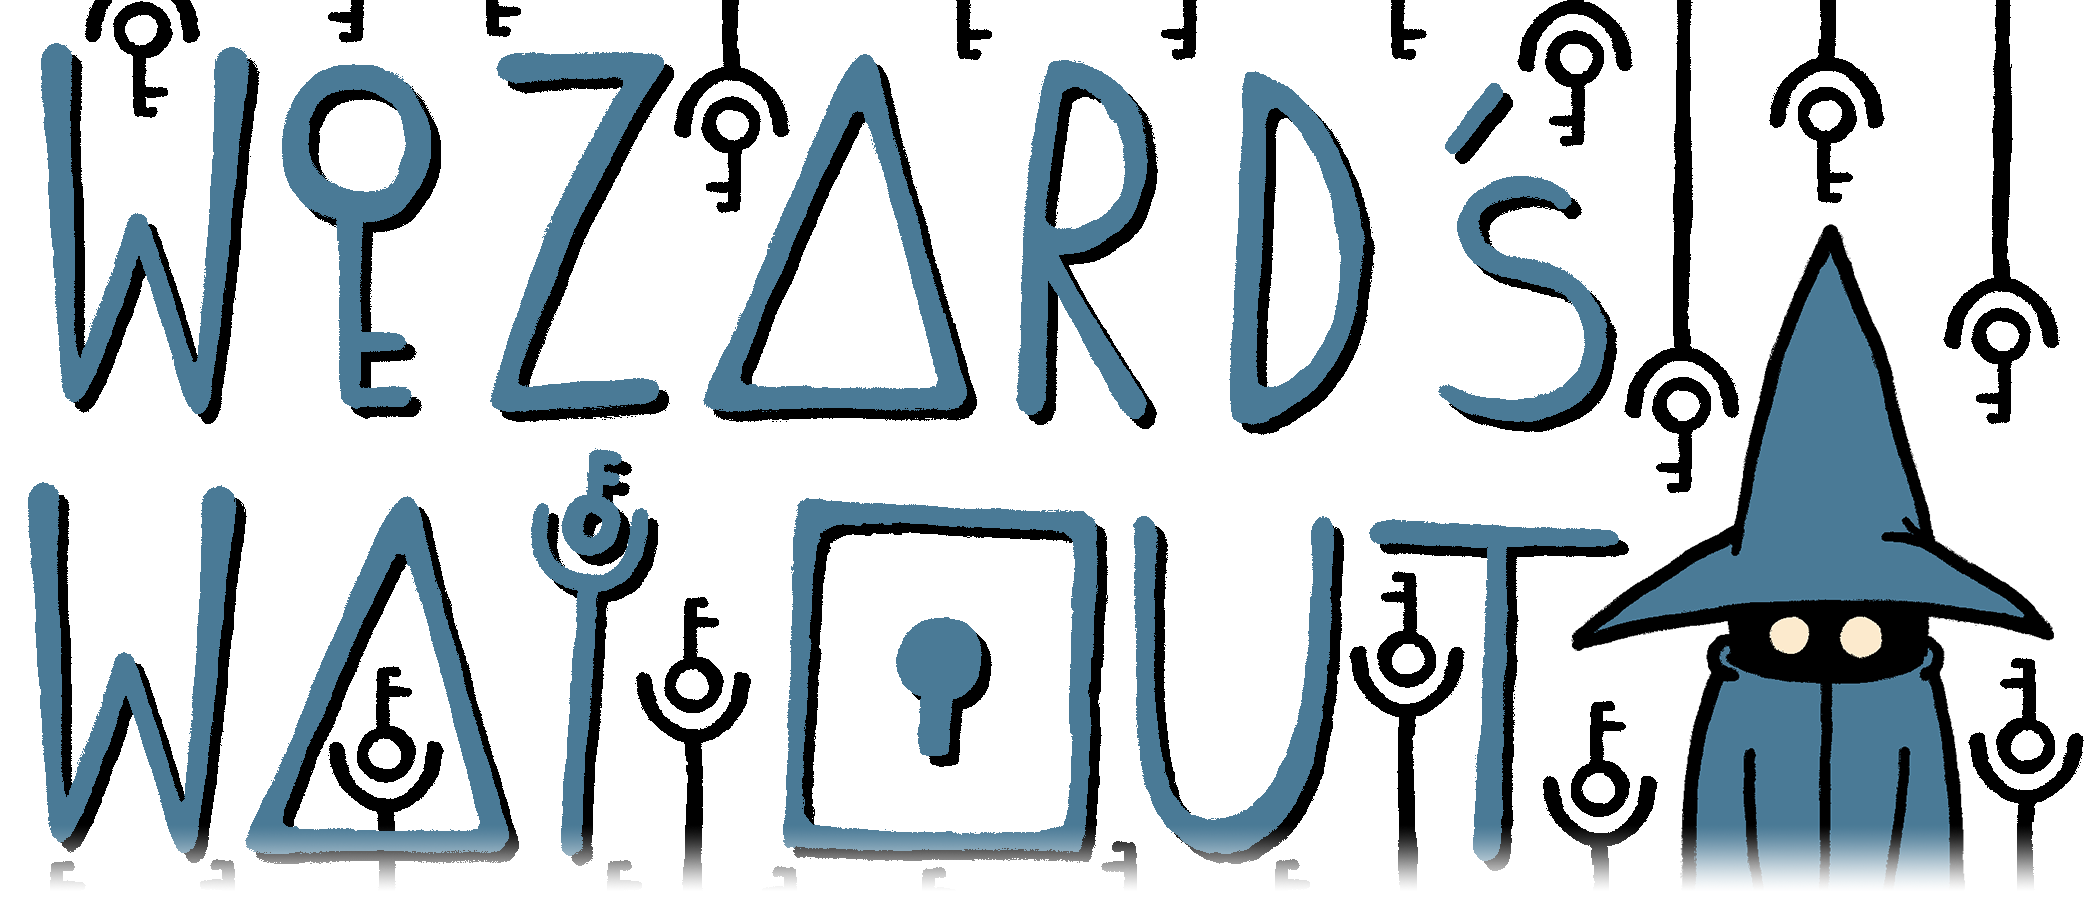 Wizard's Way Out - Free Version